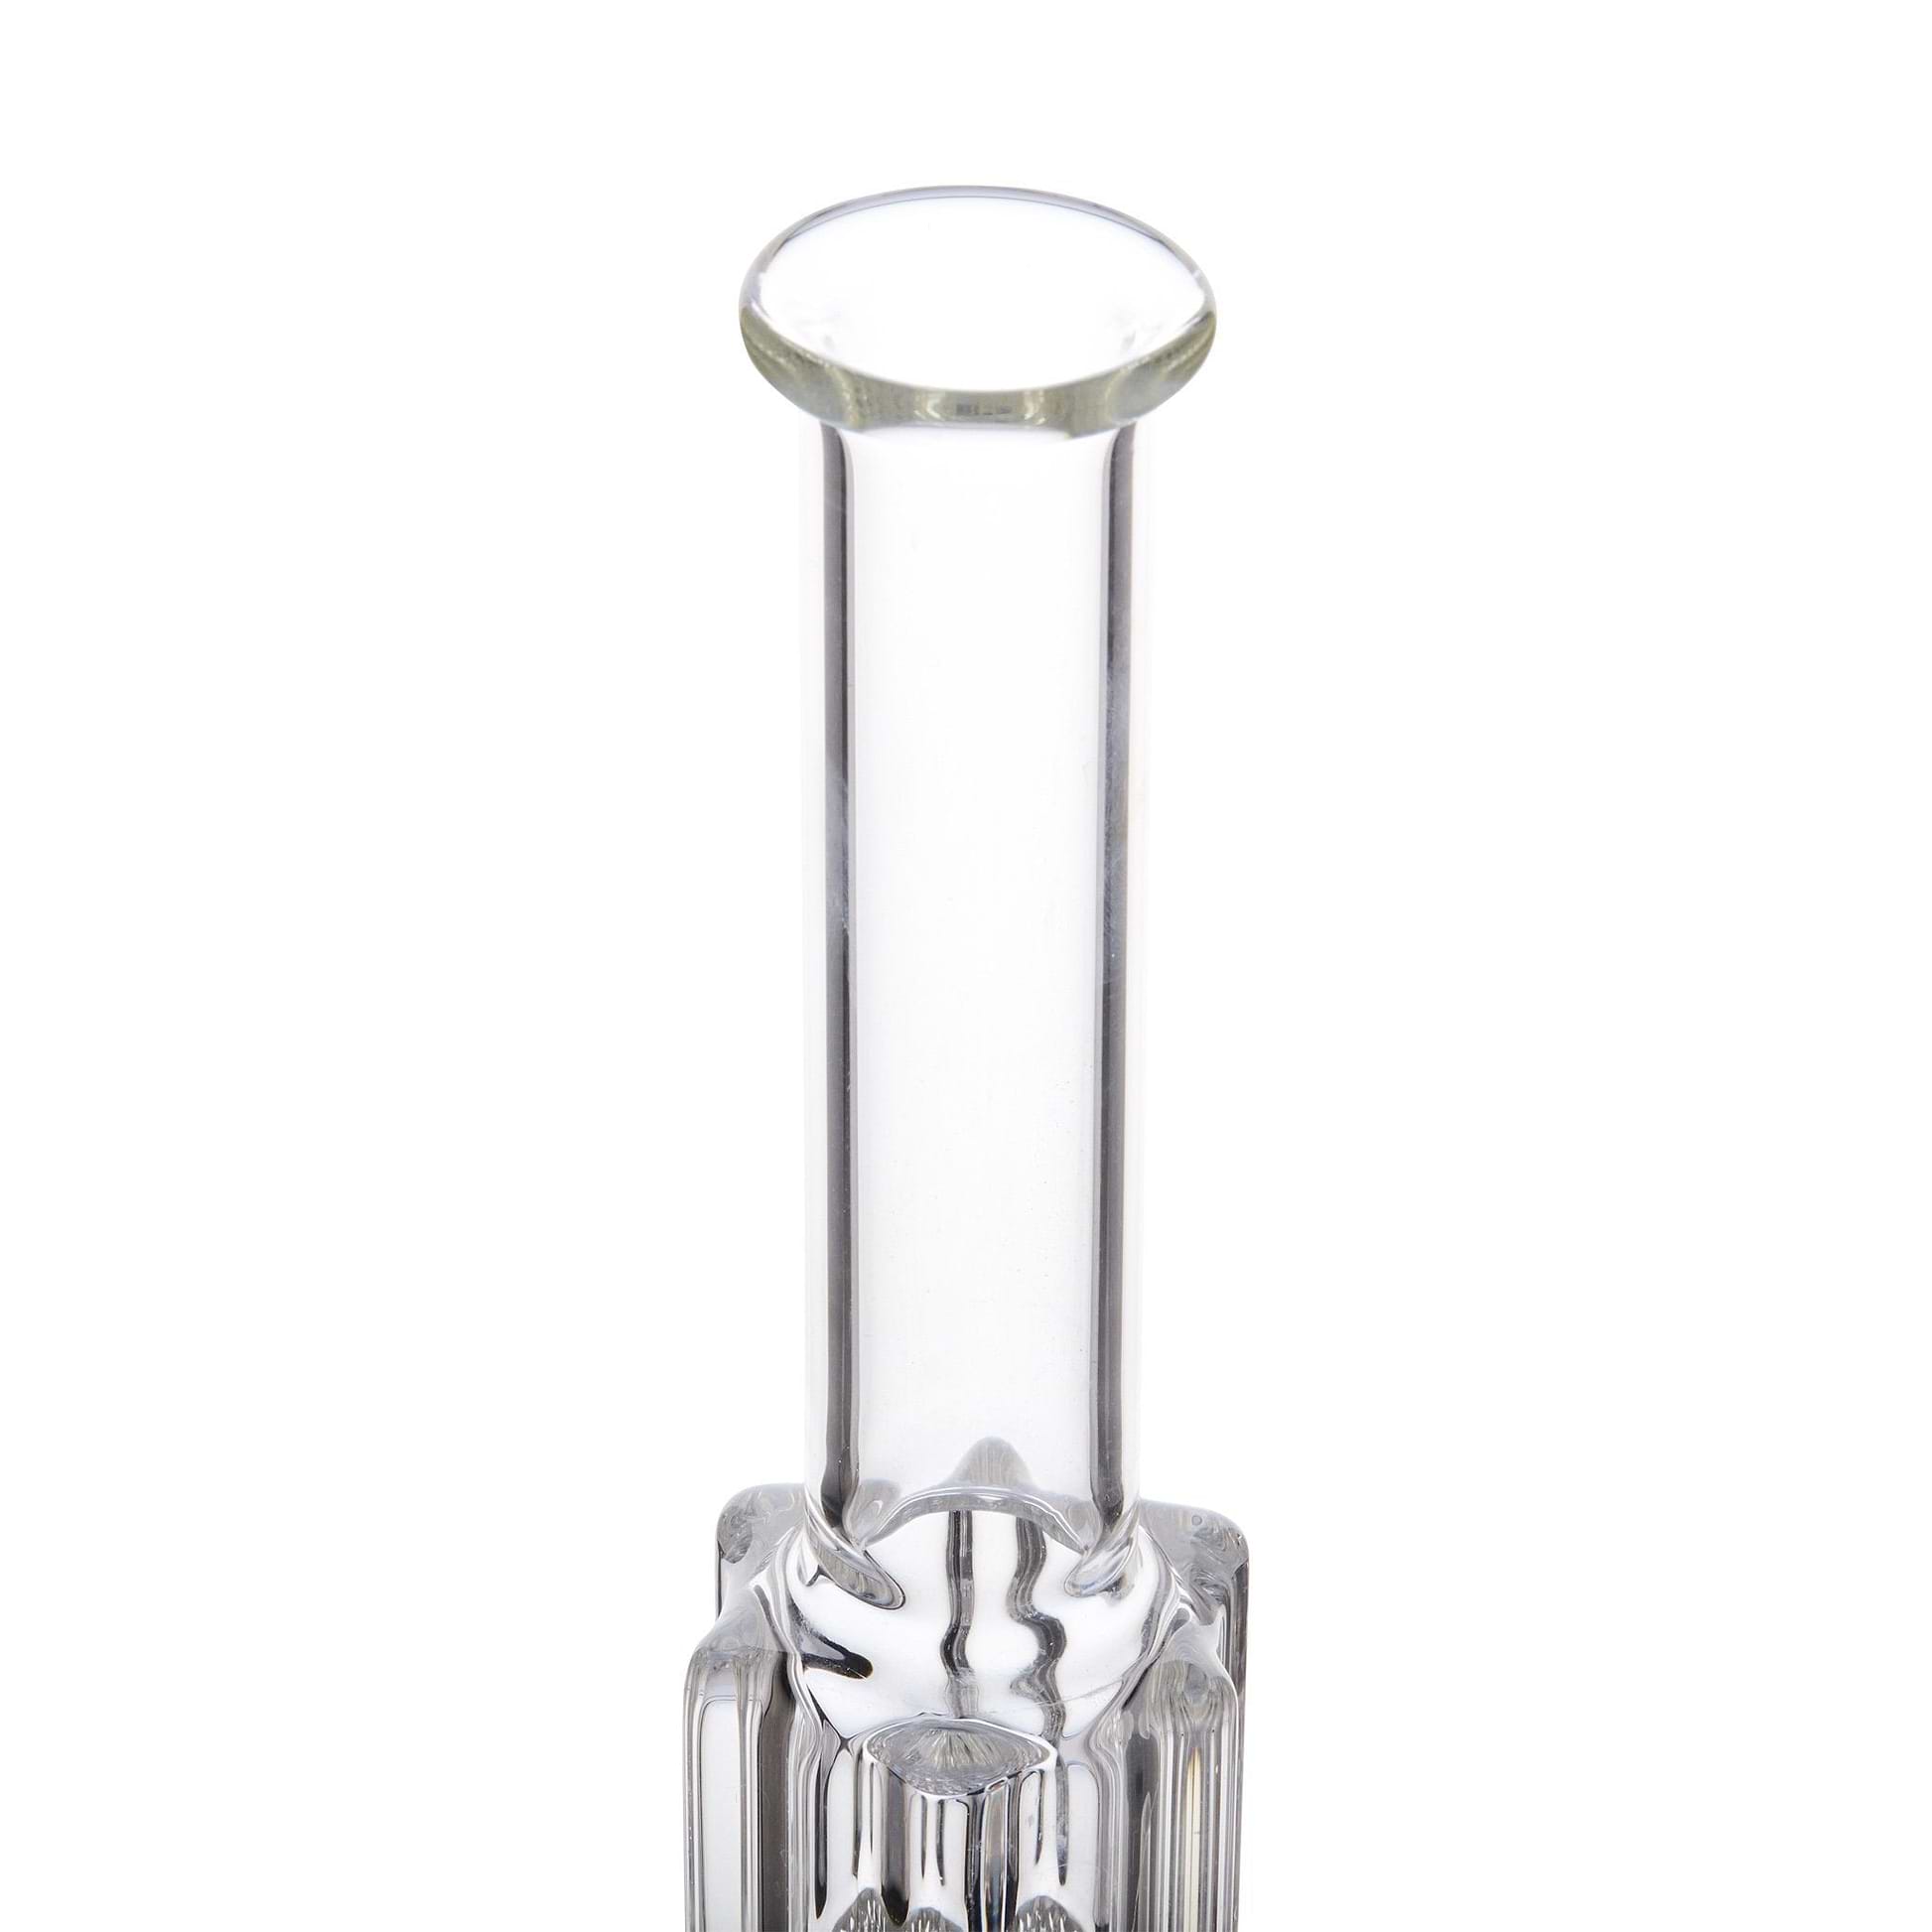 13-inch glass smoking device with sleek shape and elegant layered crystal design